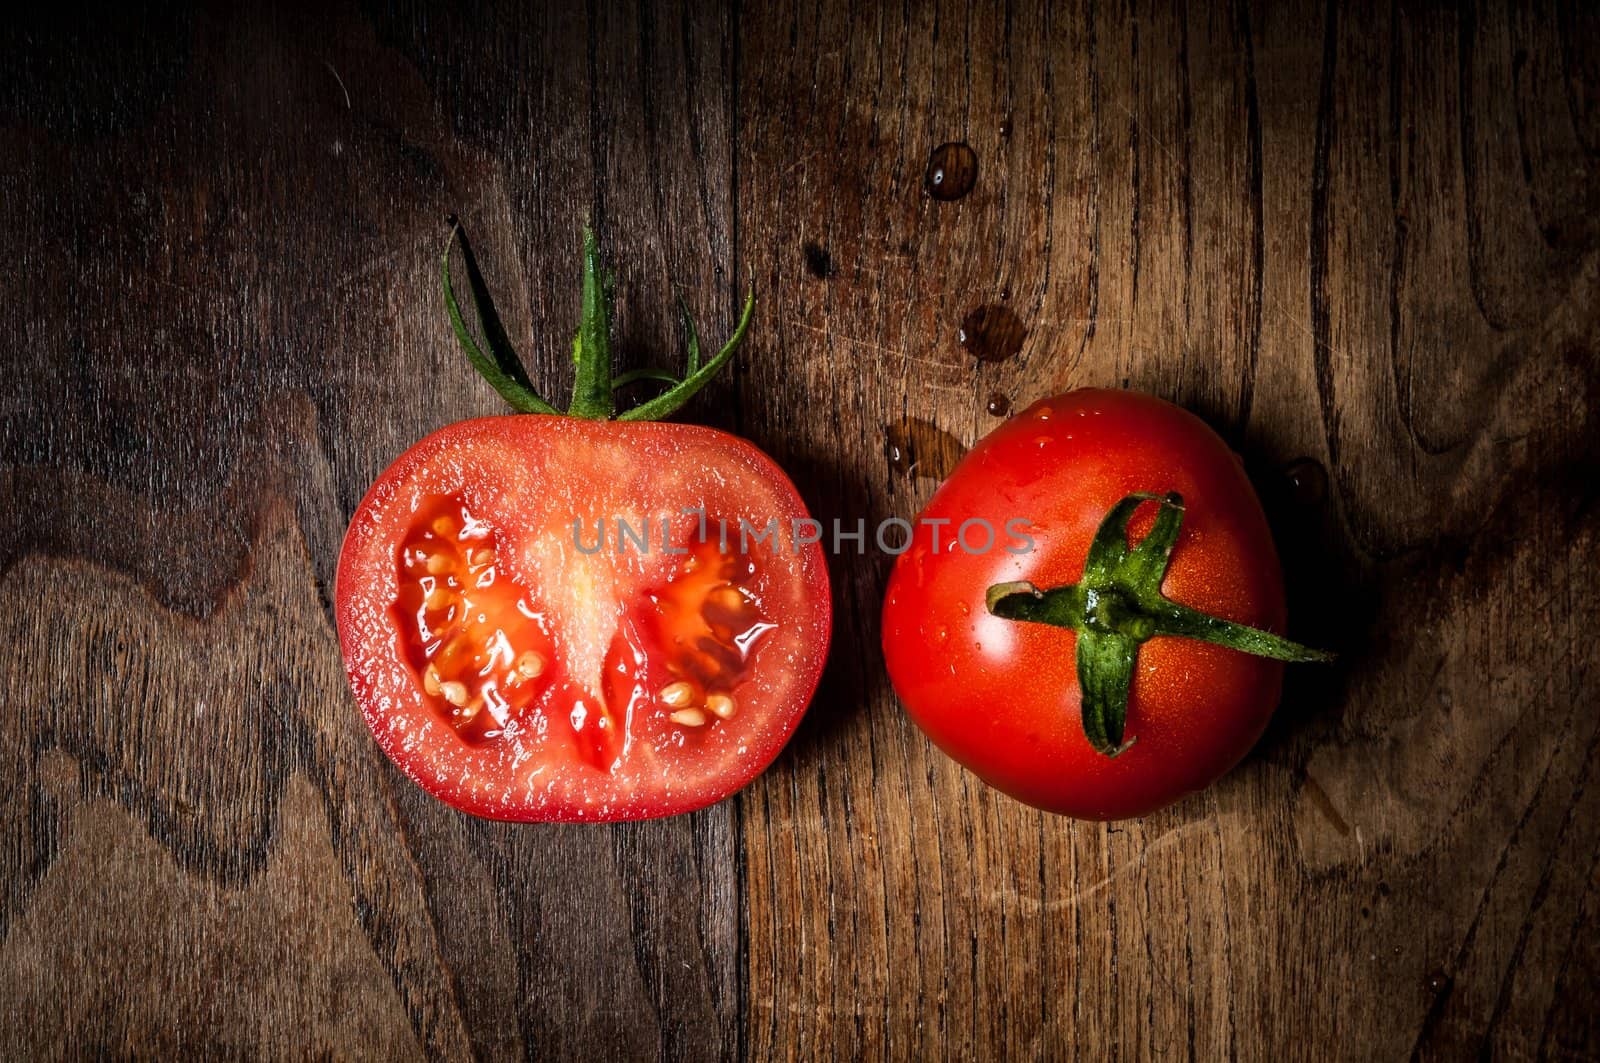 half and whole tomatoes on brown textured wood